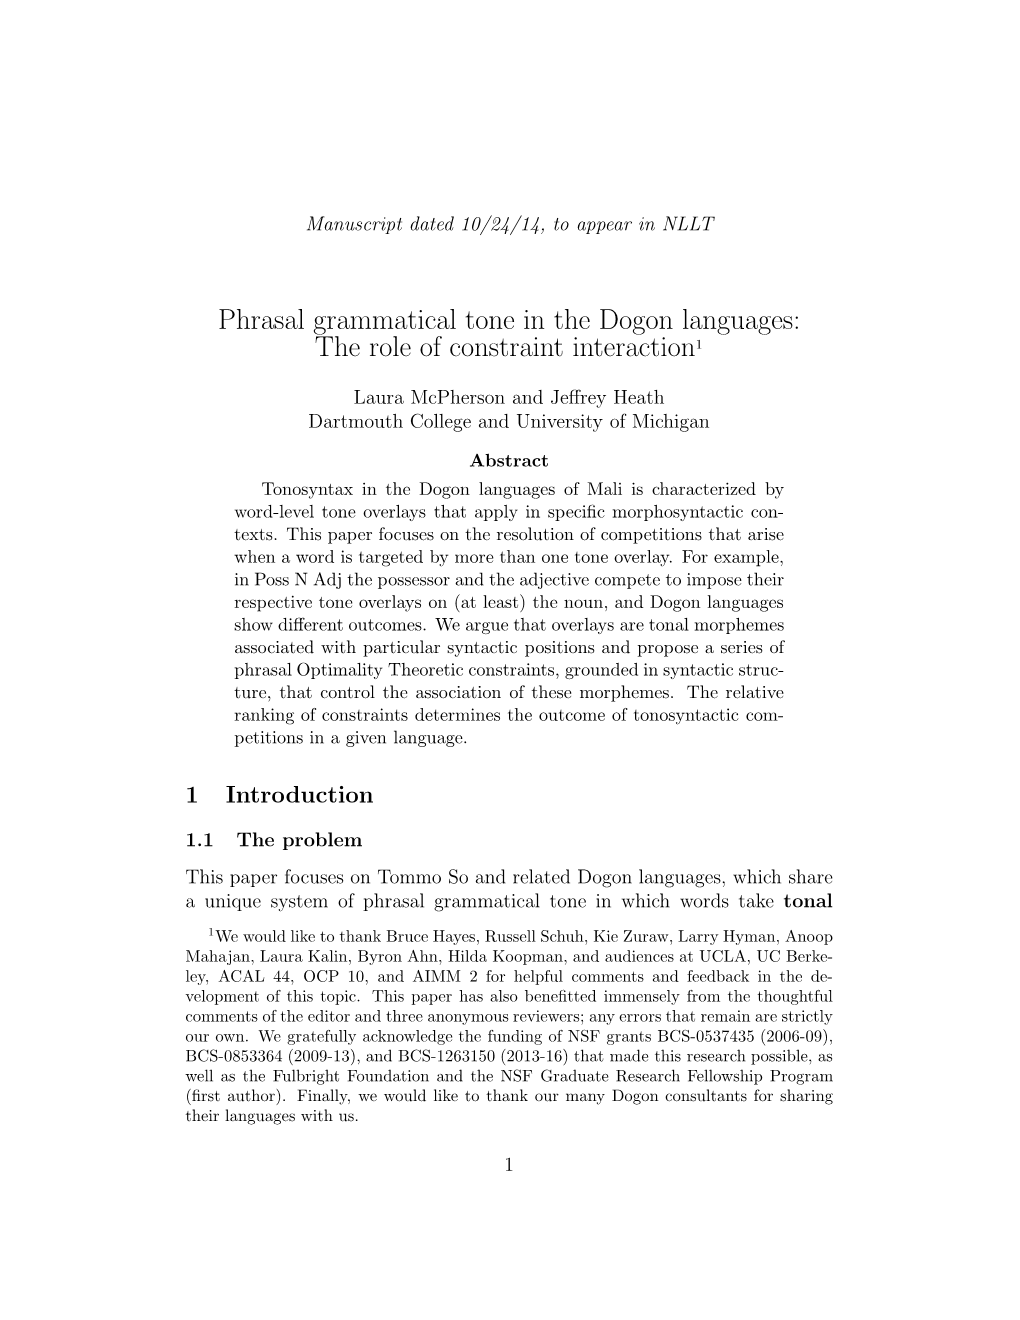 Phrasal Grammatical Tone in the Dogon Languages: the Role of Constraint Interaction1